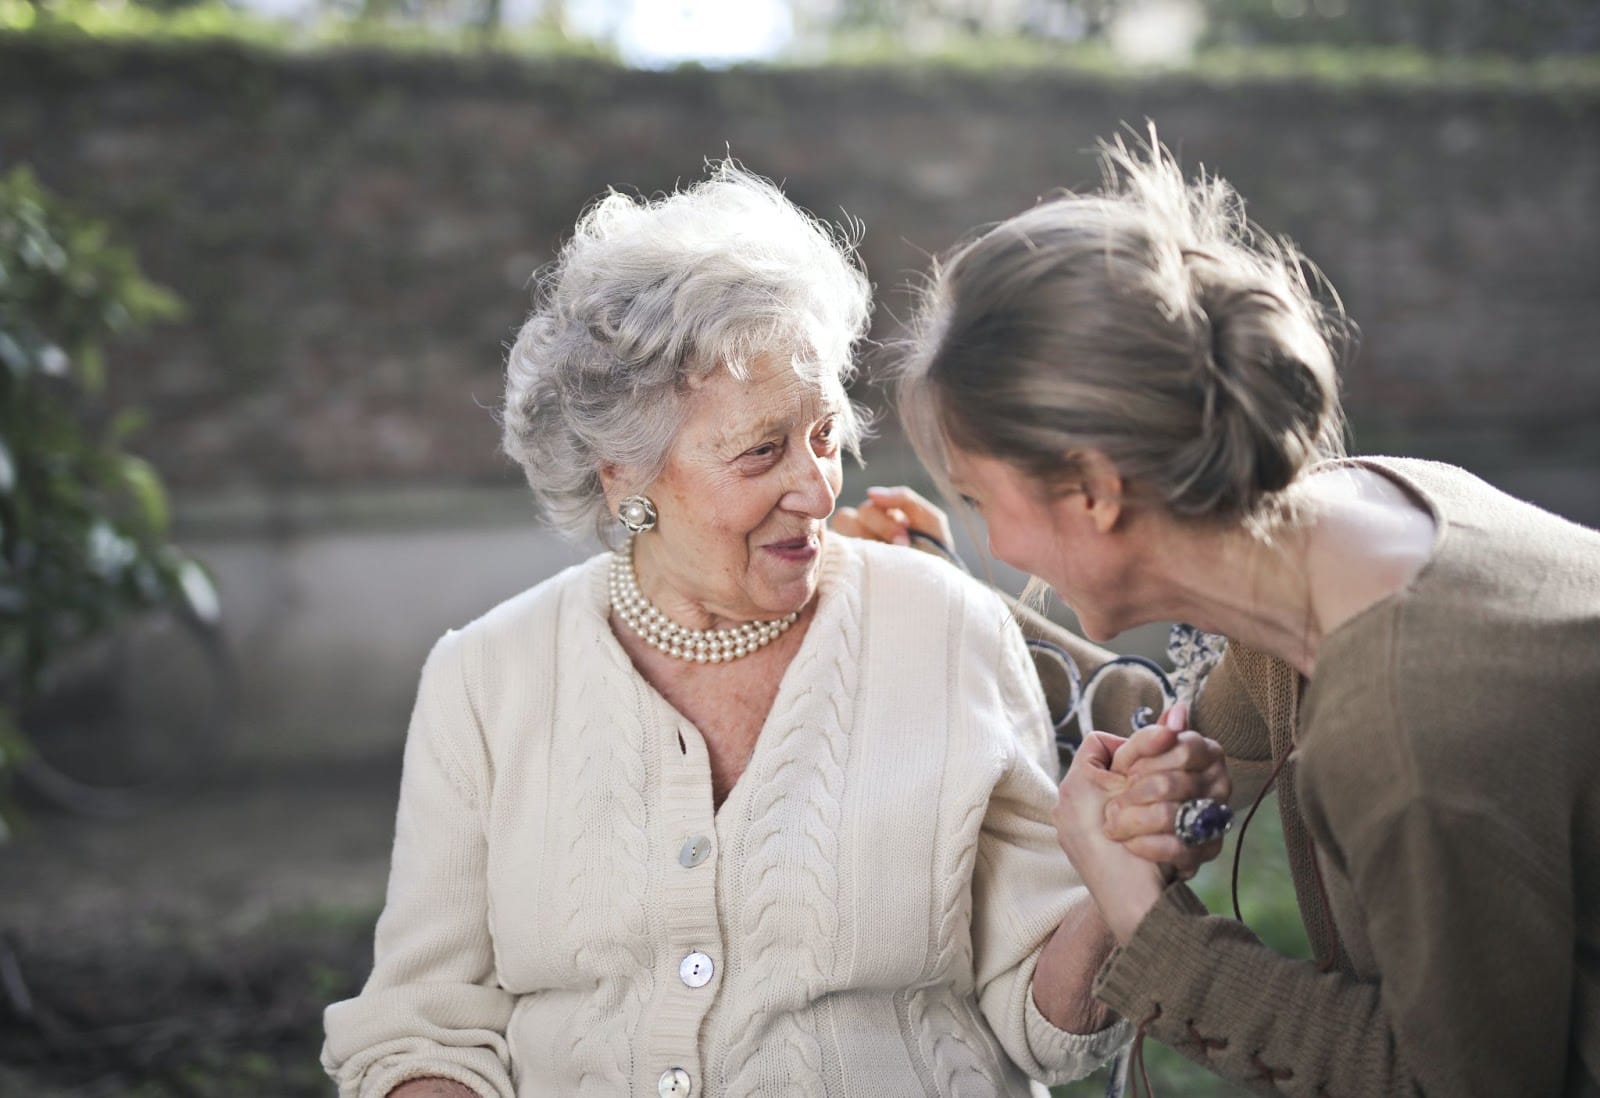 An elderly woman smiling and laughing with a younger woman